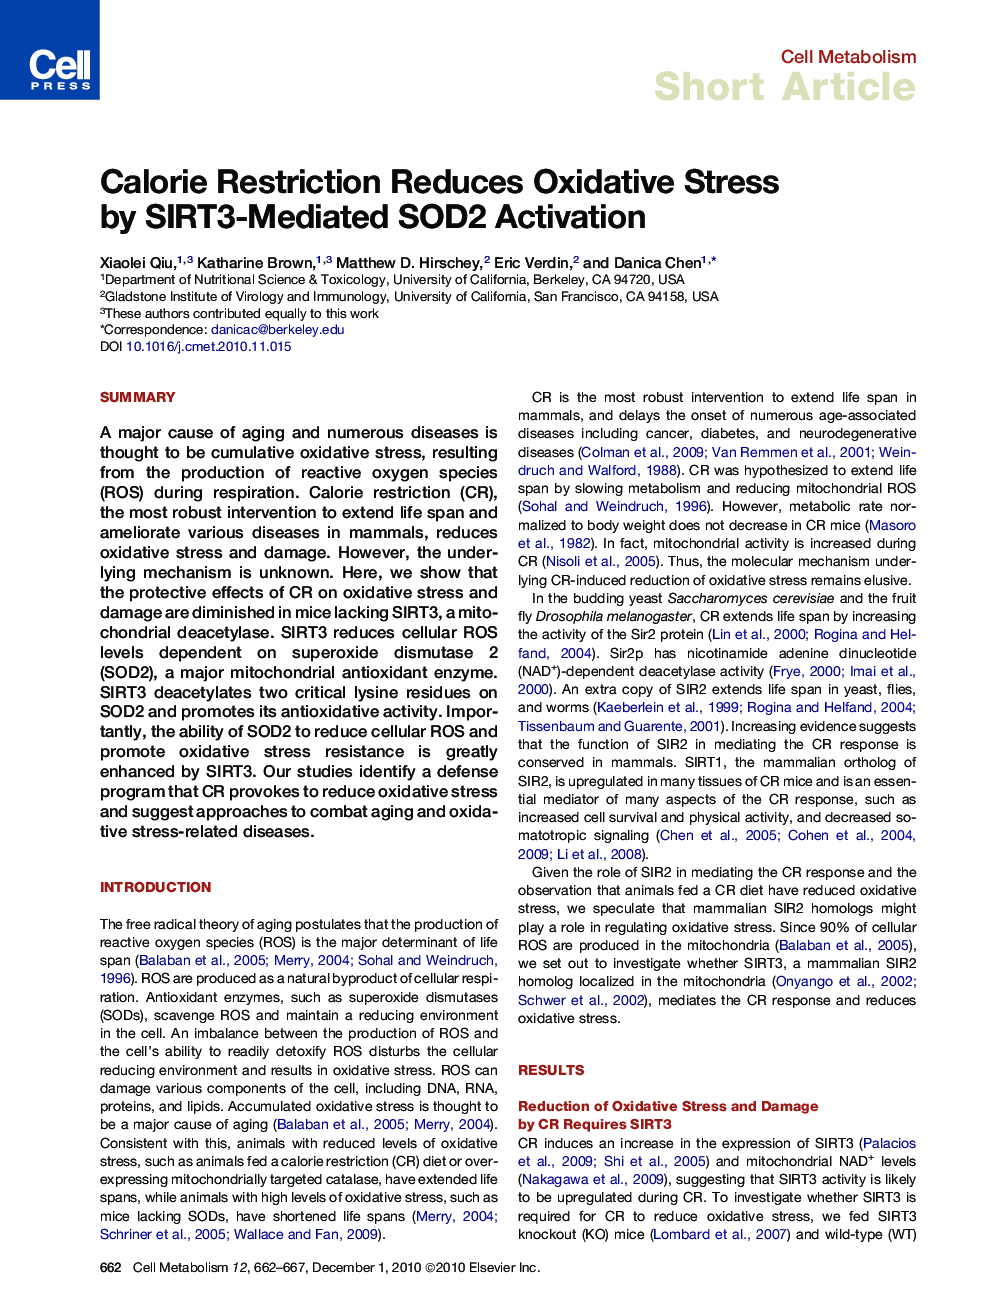 Calorie Restriction Reduces Oxidative Stress by SIRT3-Mediated SOD2 Activation